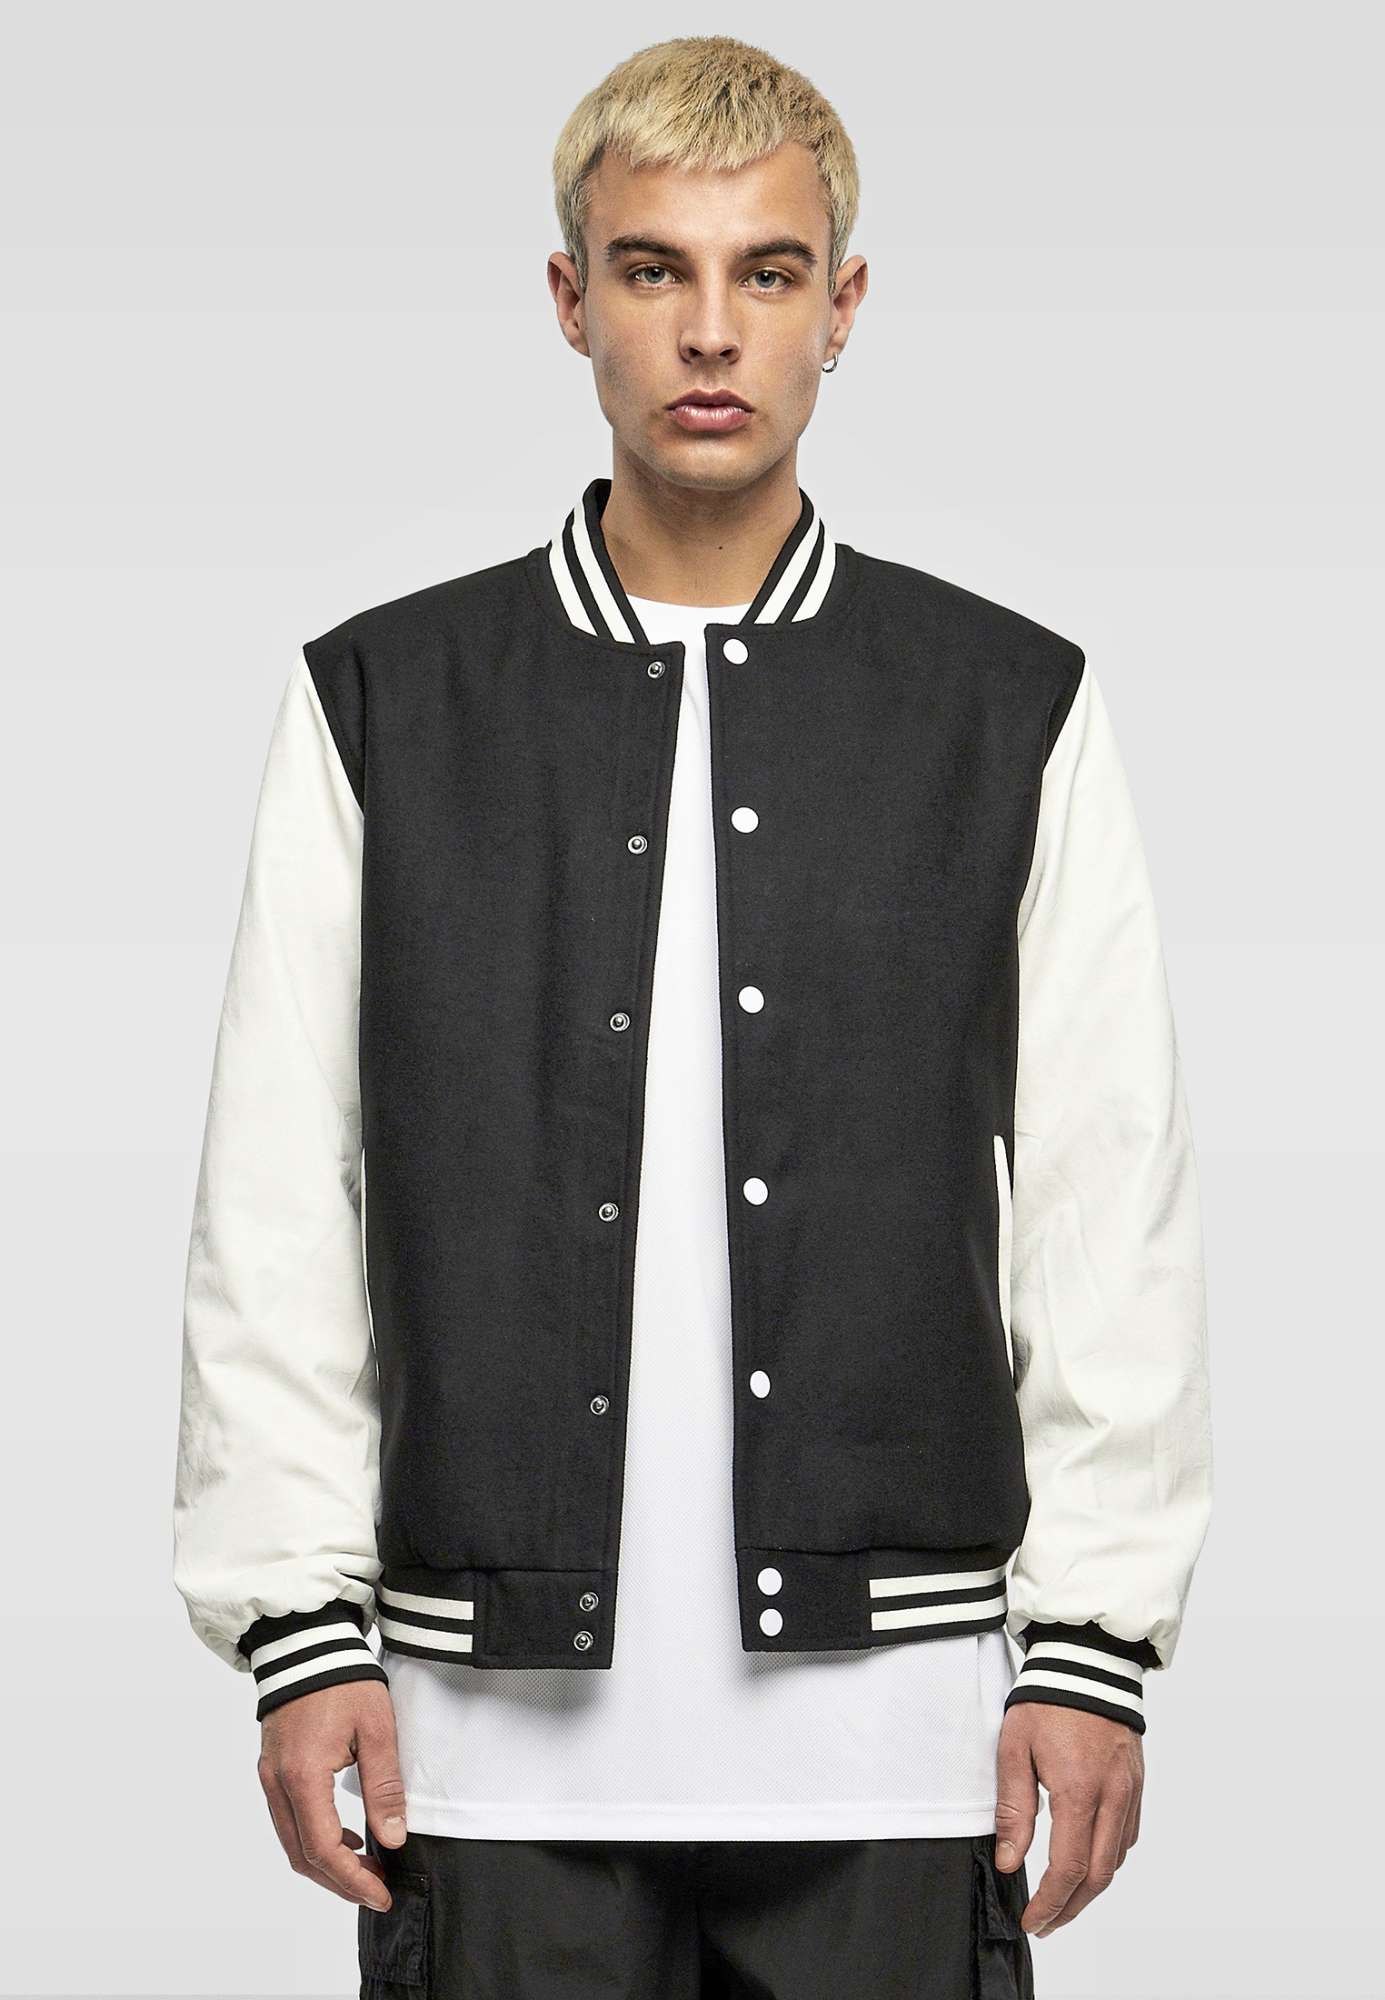 Build Your Brand Oldschool College Jacket Black/White XL (BY269)